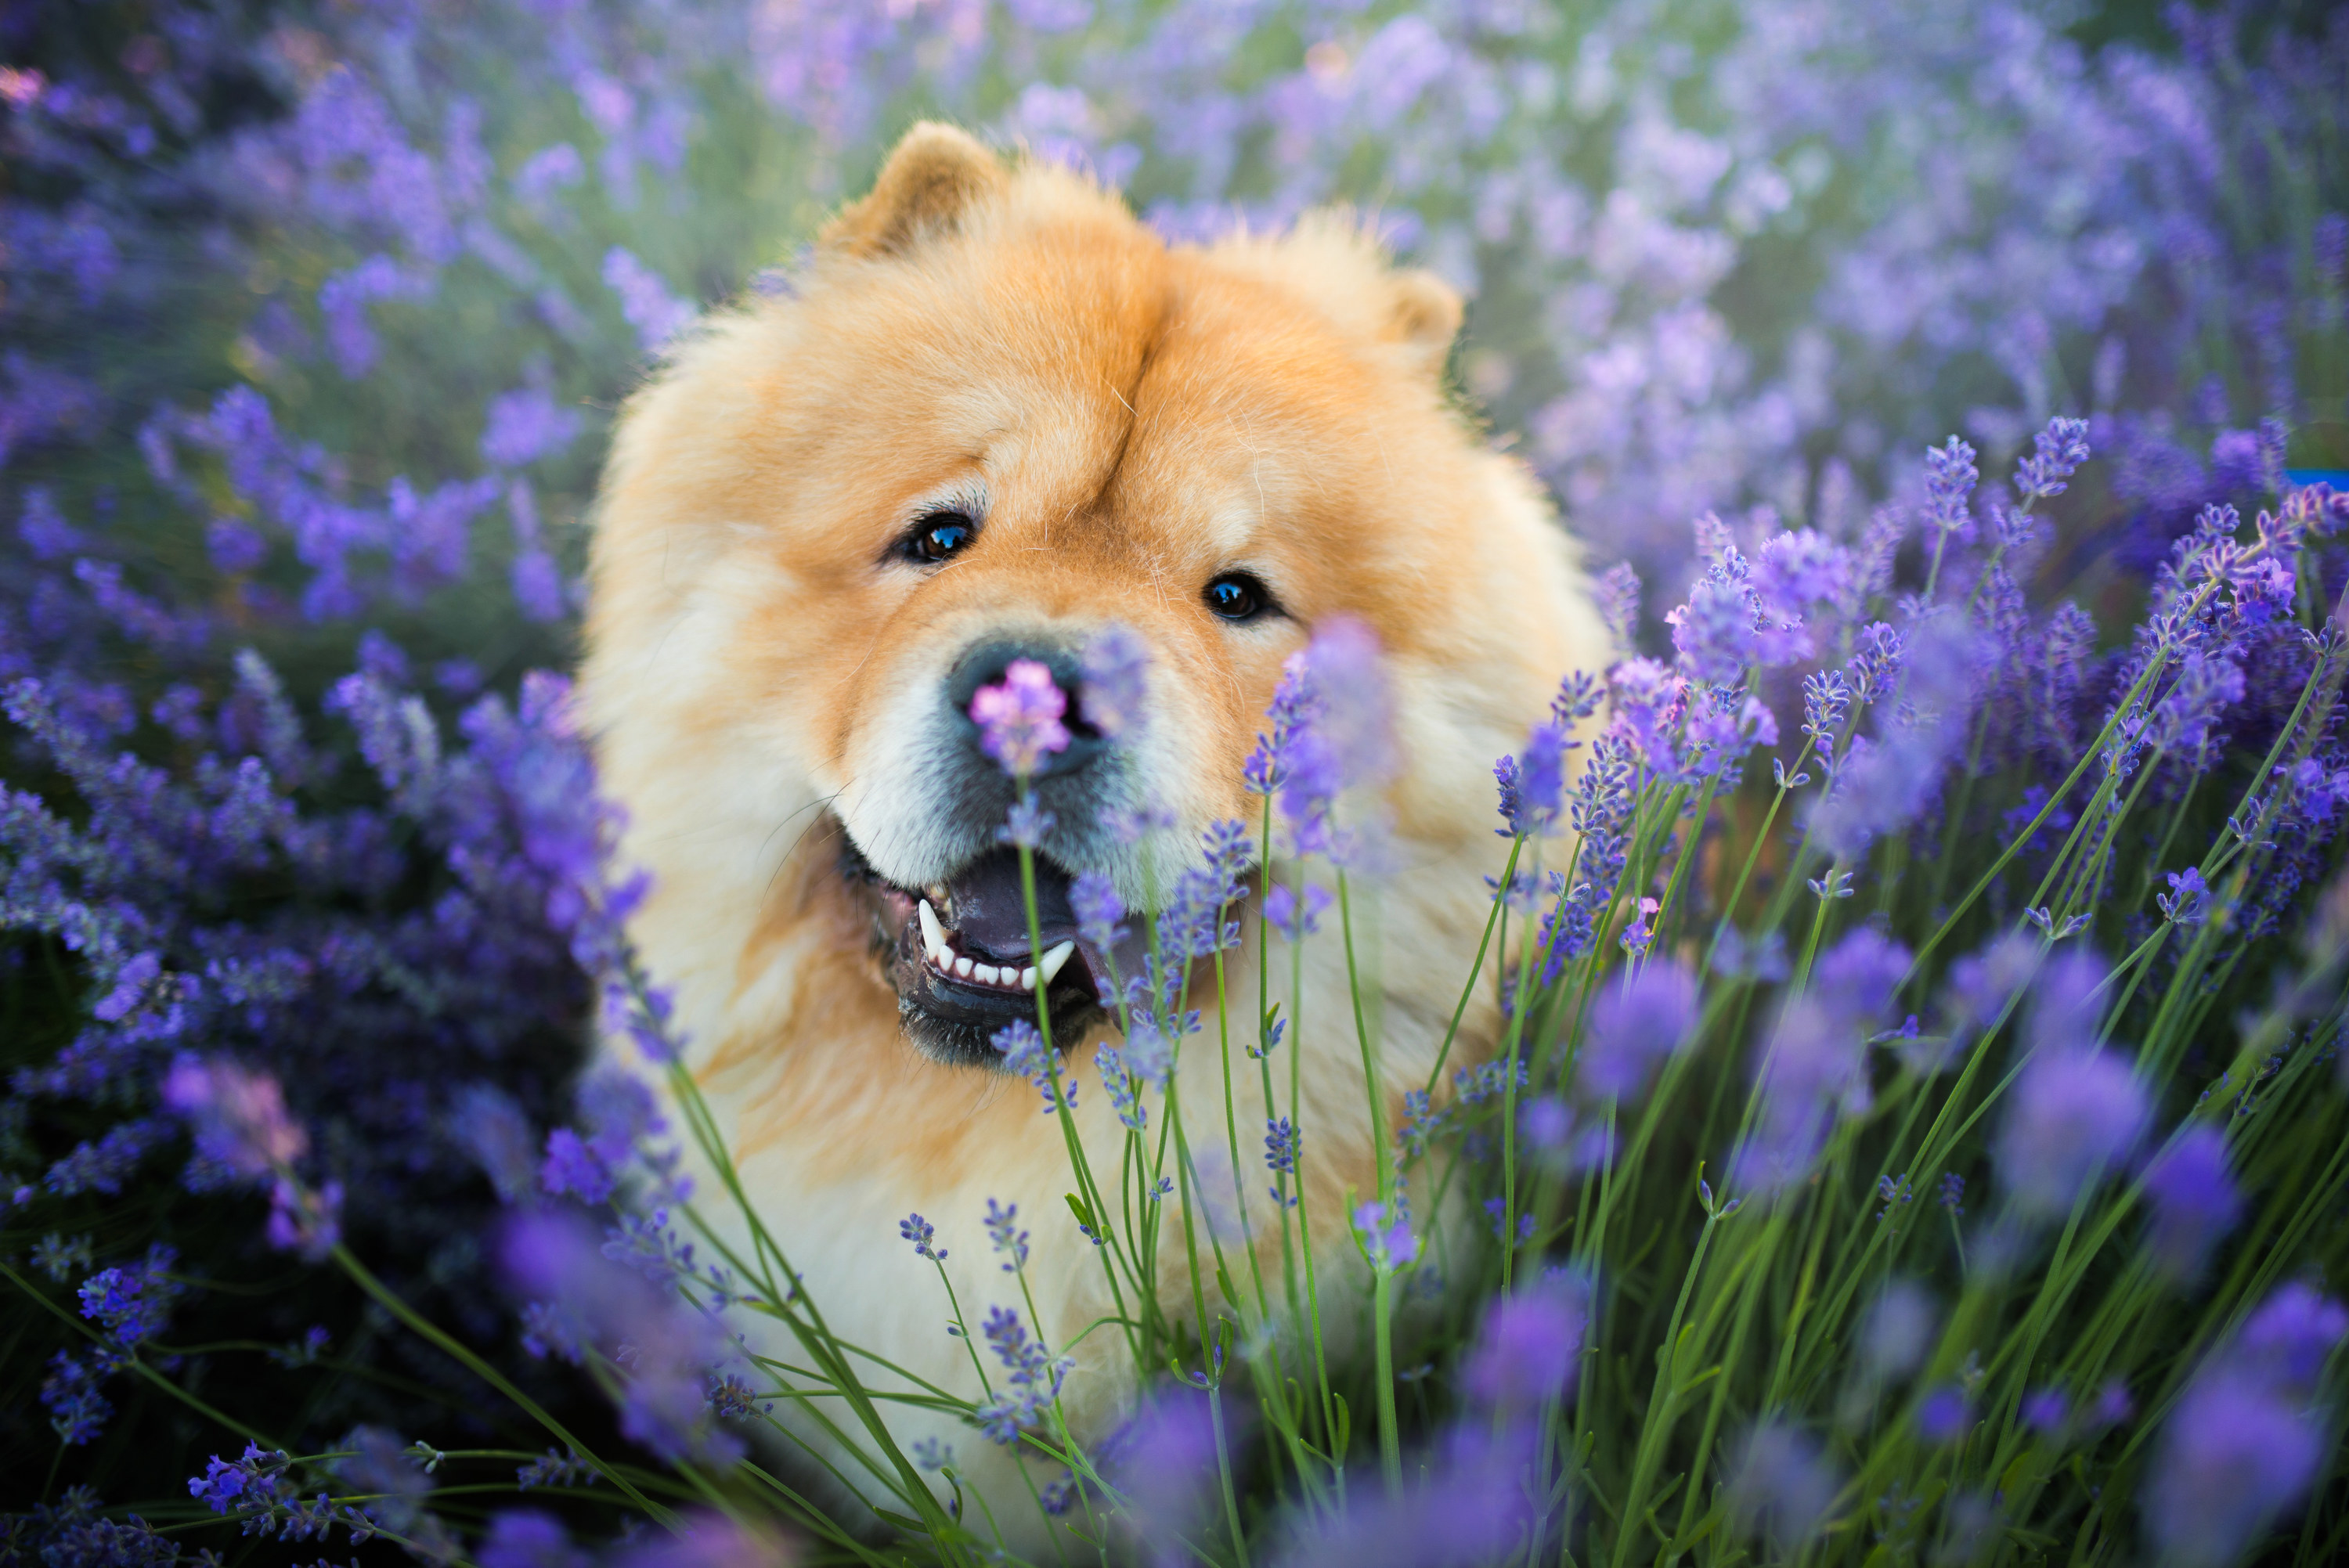 A Chow Chow in a field of purple flowers